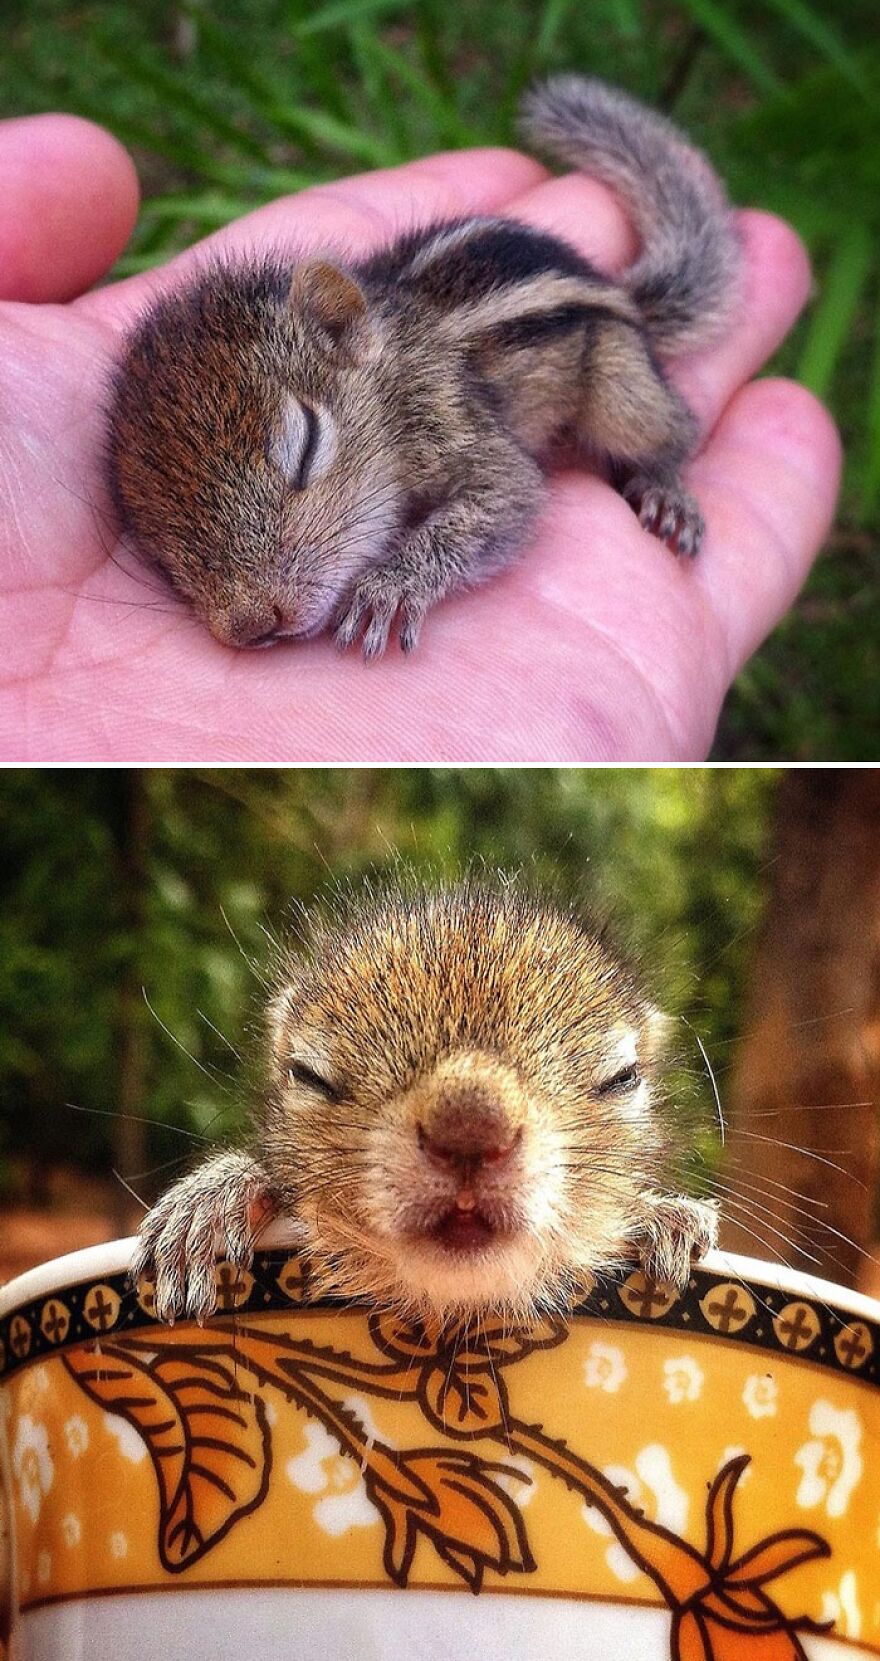 The Orphaned Baby Sri Lankan Palm Squirrel So Tiny In My Palm